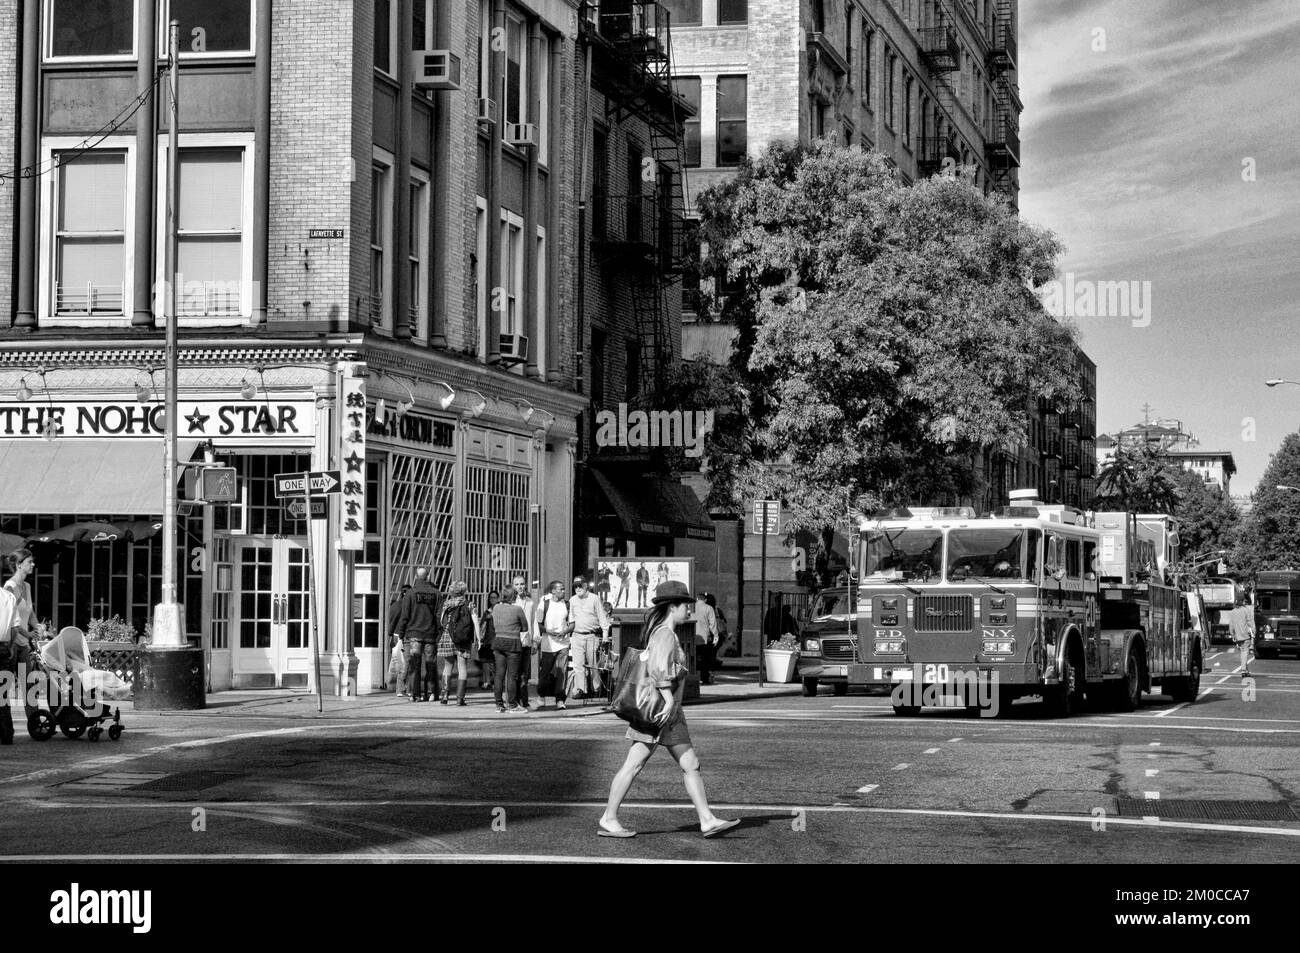 A fire truck passes in front of The Noho Star, one of the restaurants in the East Village. Manhattan, New York, USA Stock Photo